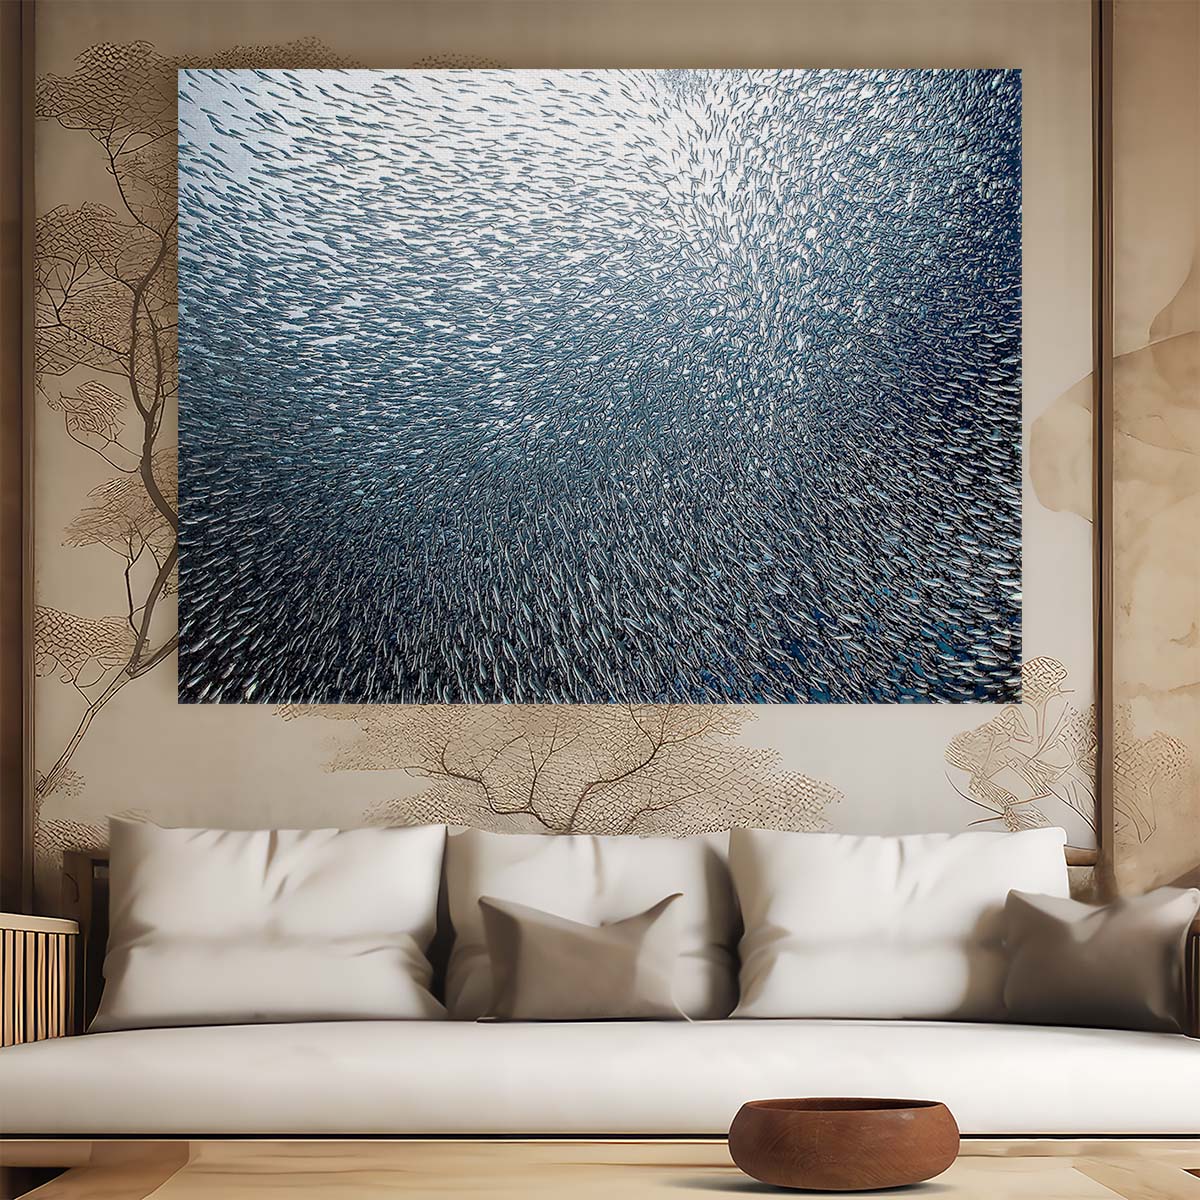 Moalboal Sardine Shoal Explosion Underwater Wall Art by Luxuriance Designs. Made in USA.